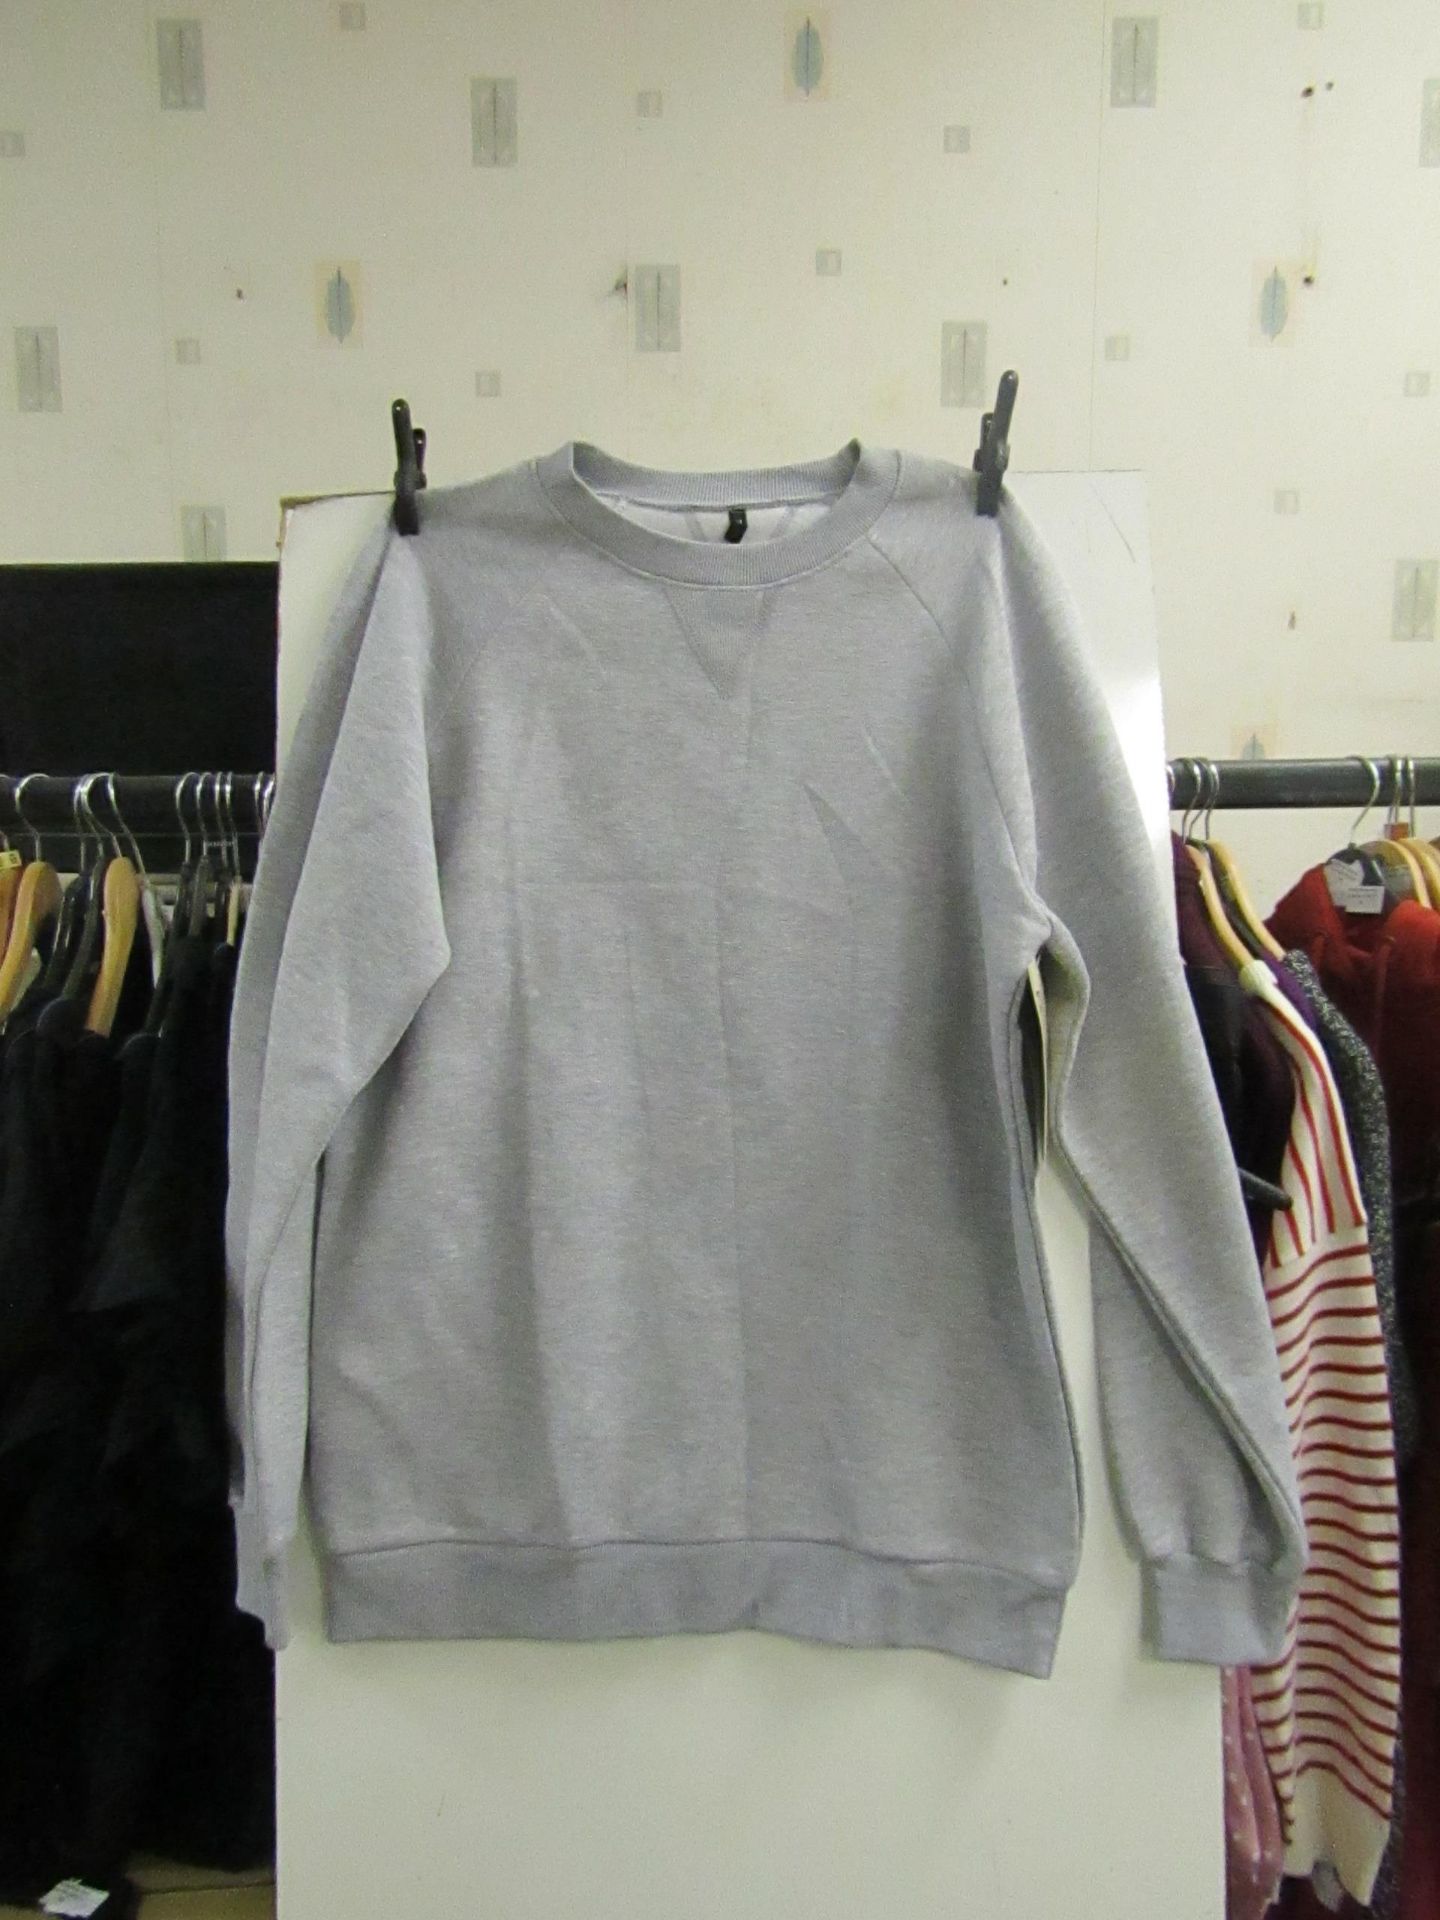 Unbranded mens jumper, size M, new with tags.